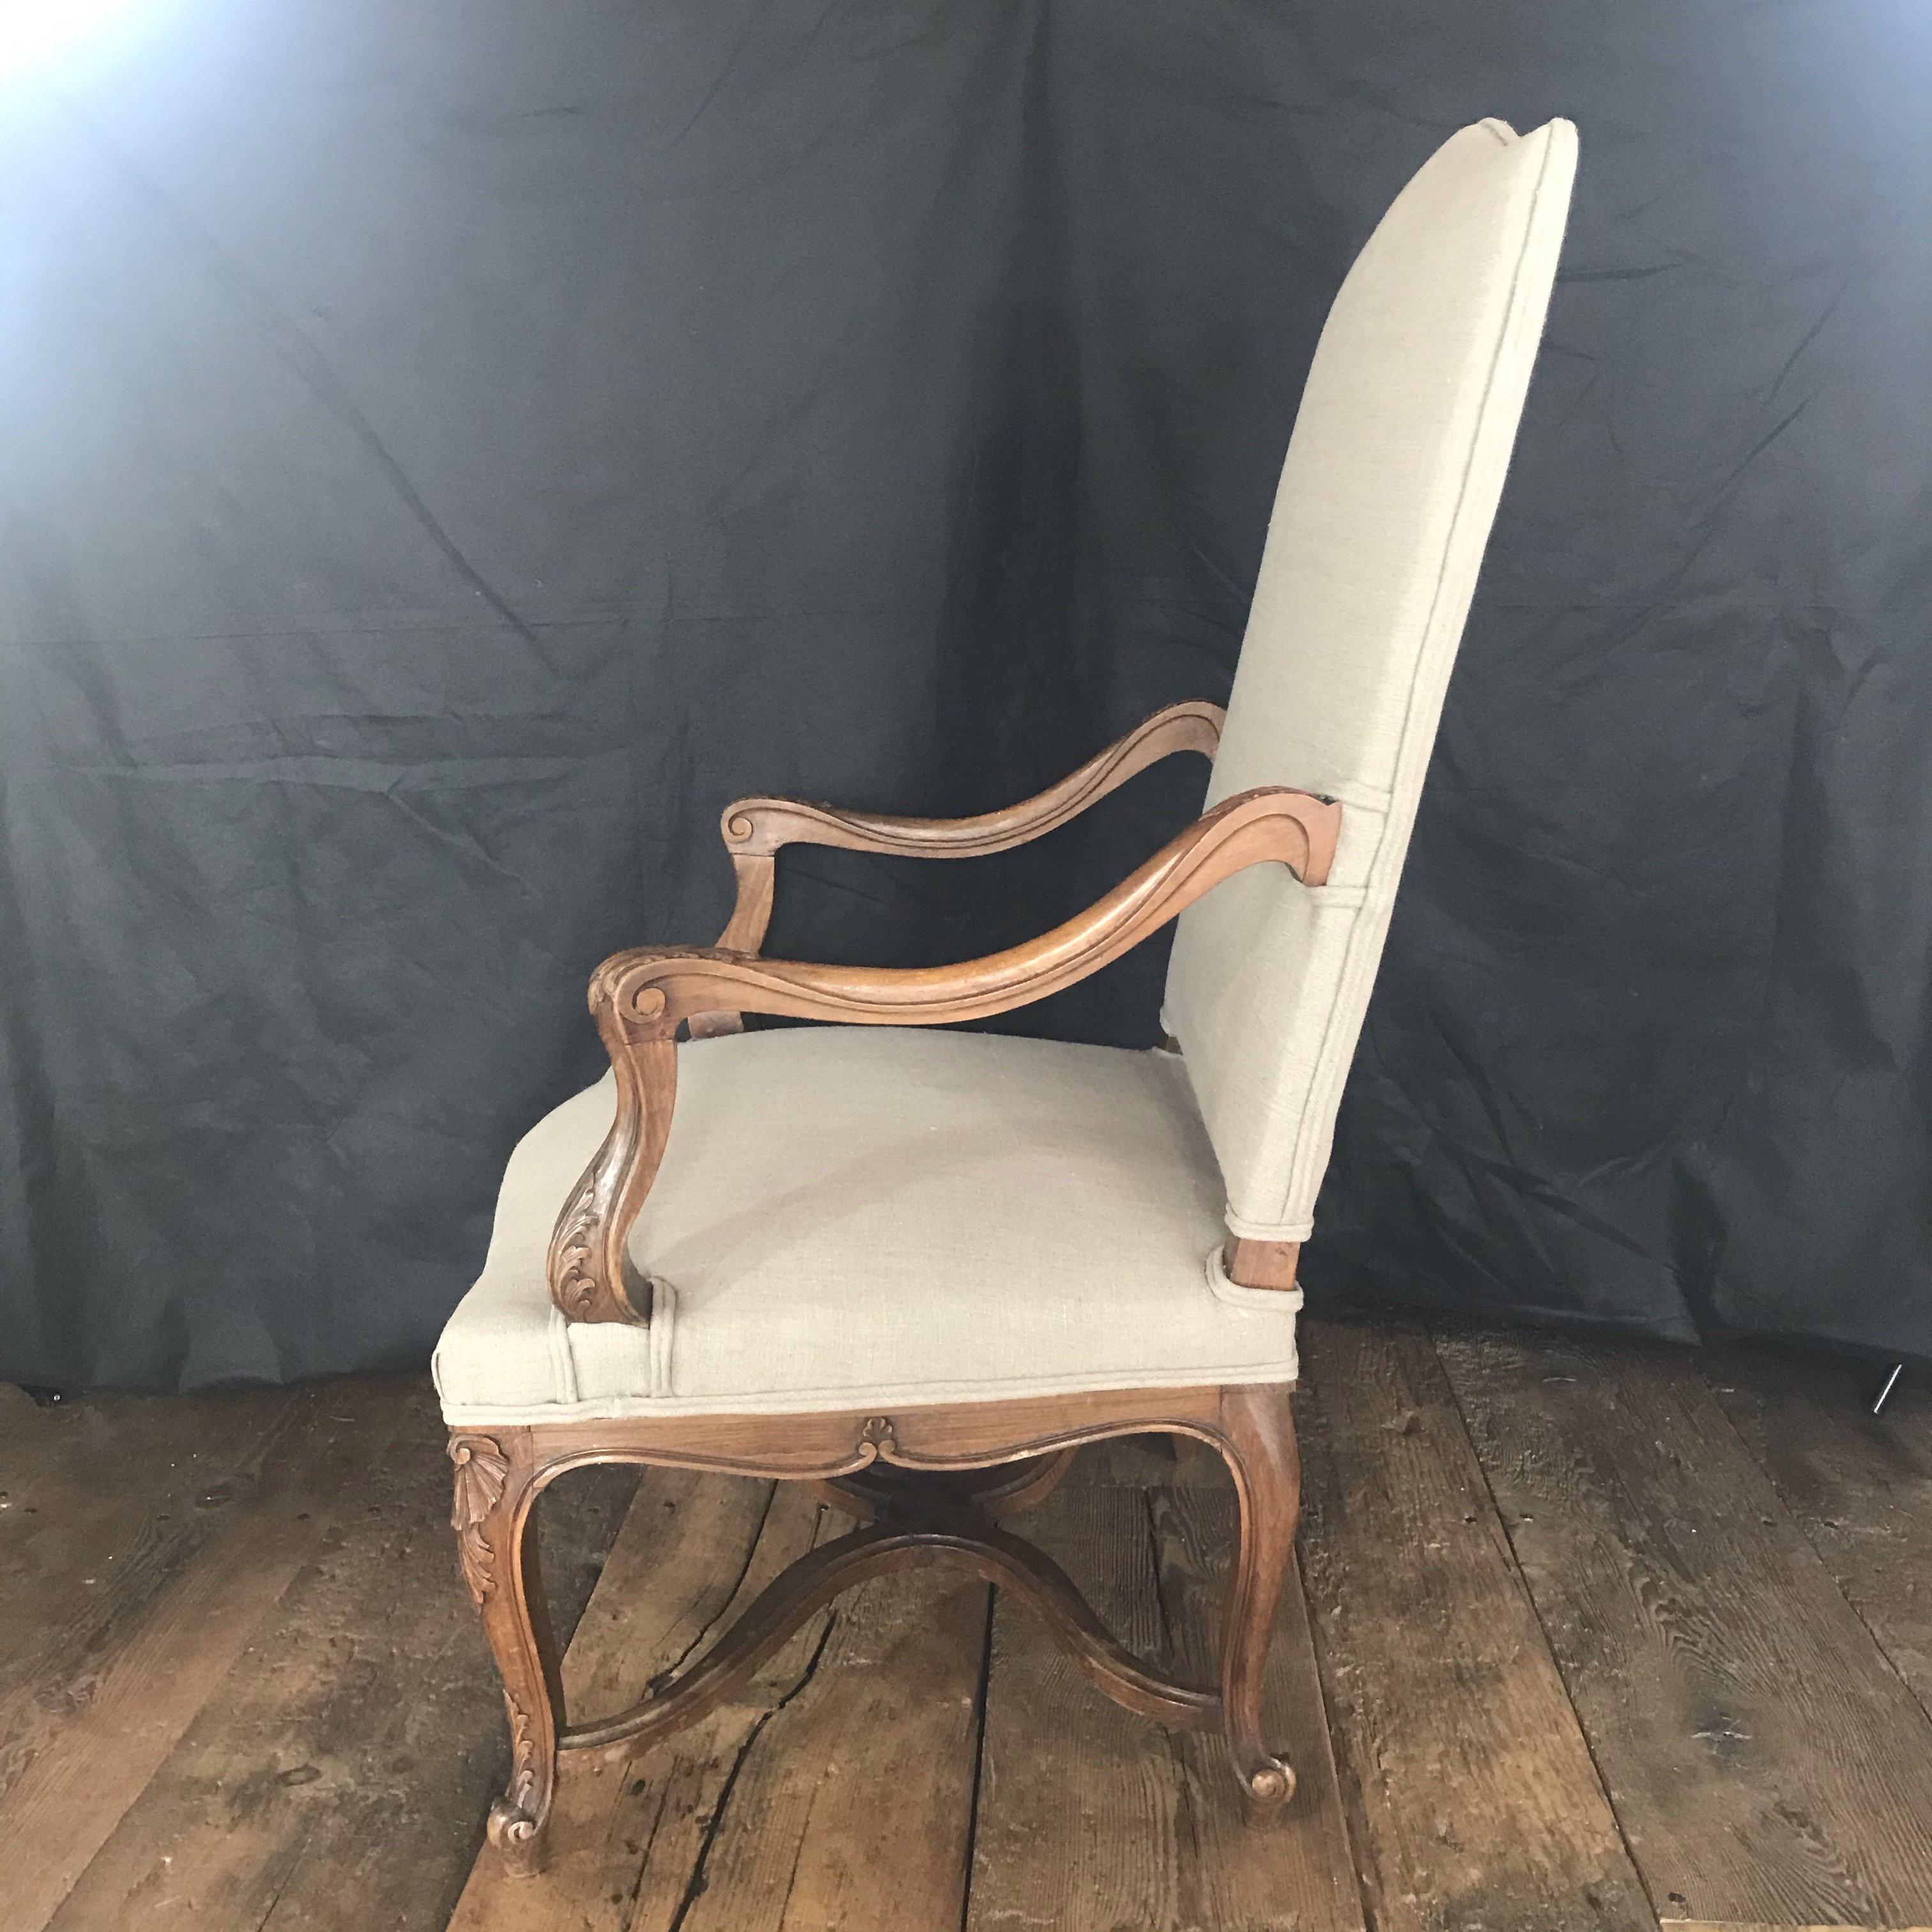 Beautiful 19th century carved walnut French Louis XV armchair with cabriole legs, carved apron with shell motif, and acanthus leaves throughout. Newly reupholstered in a high quality French cotton or linen blend.


 Measures: H seat 19”, D 23.5”